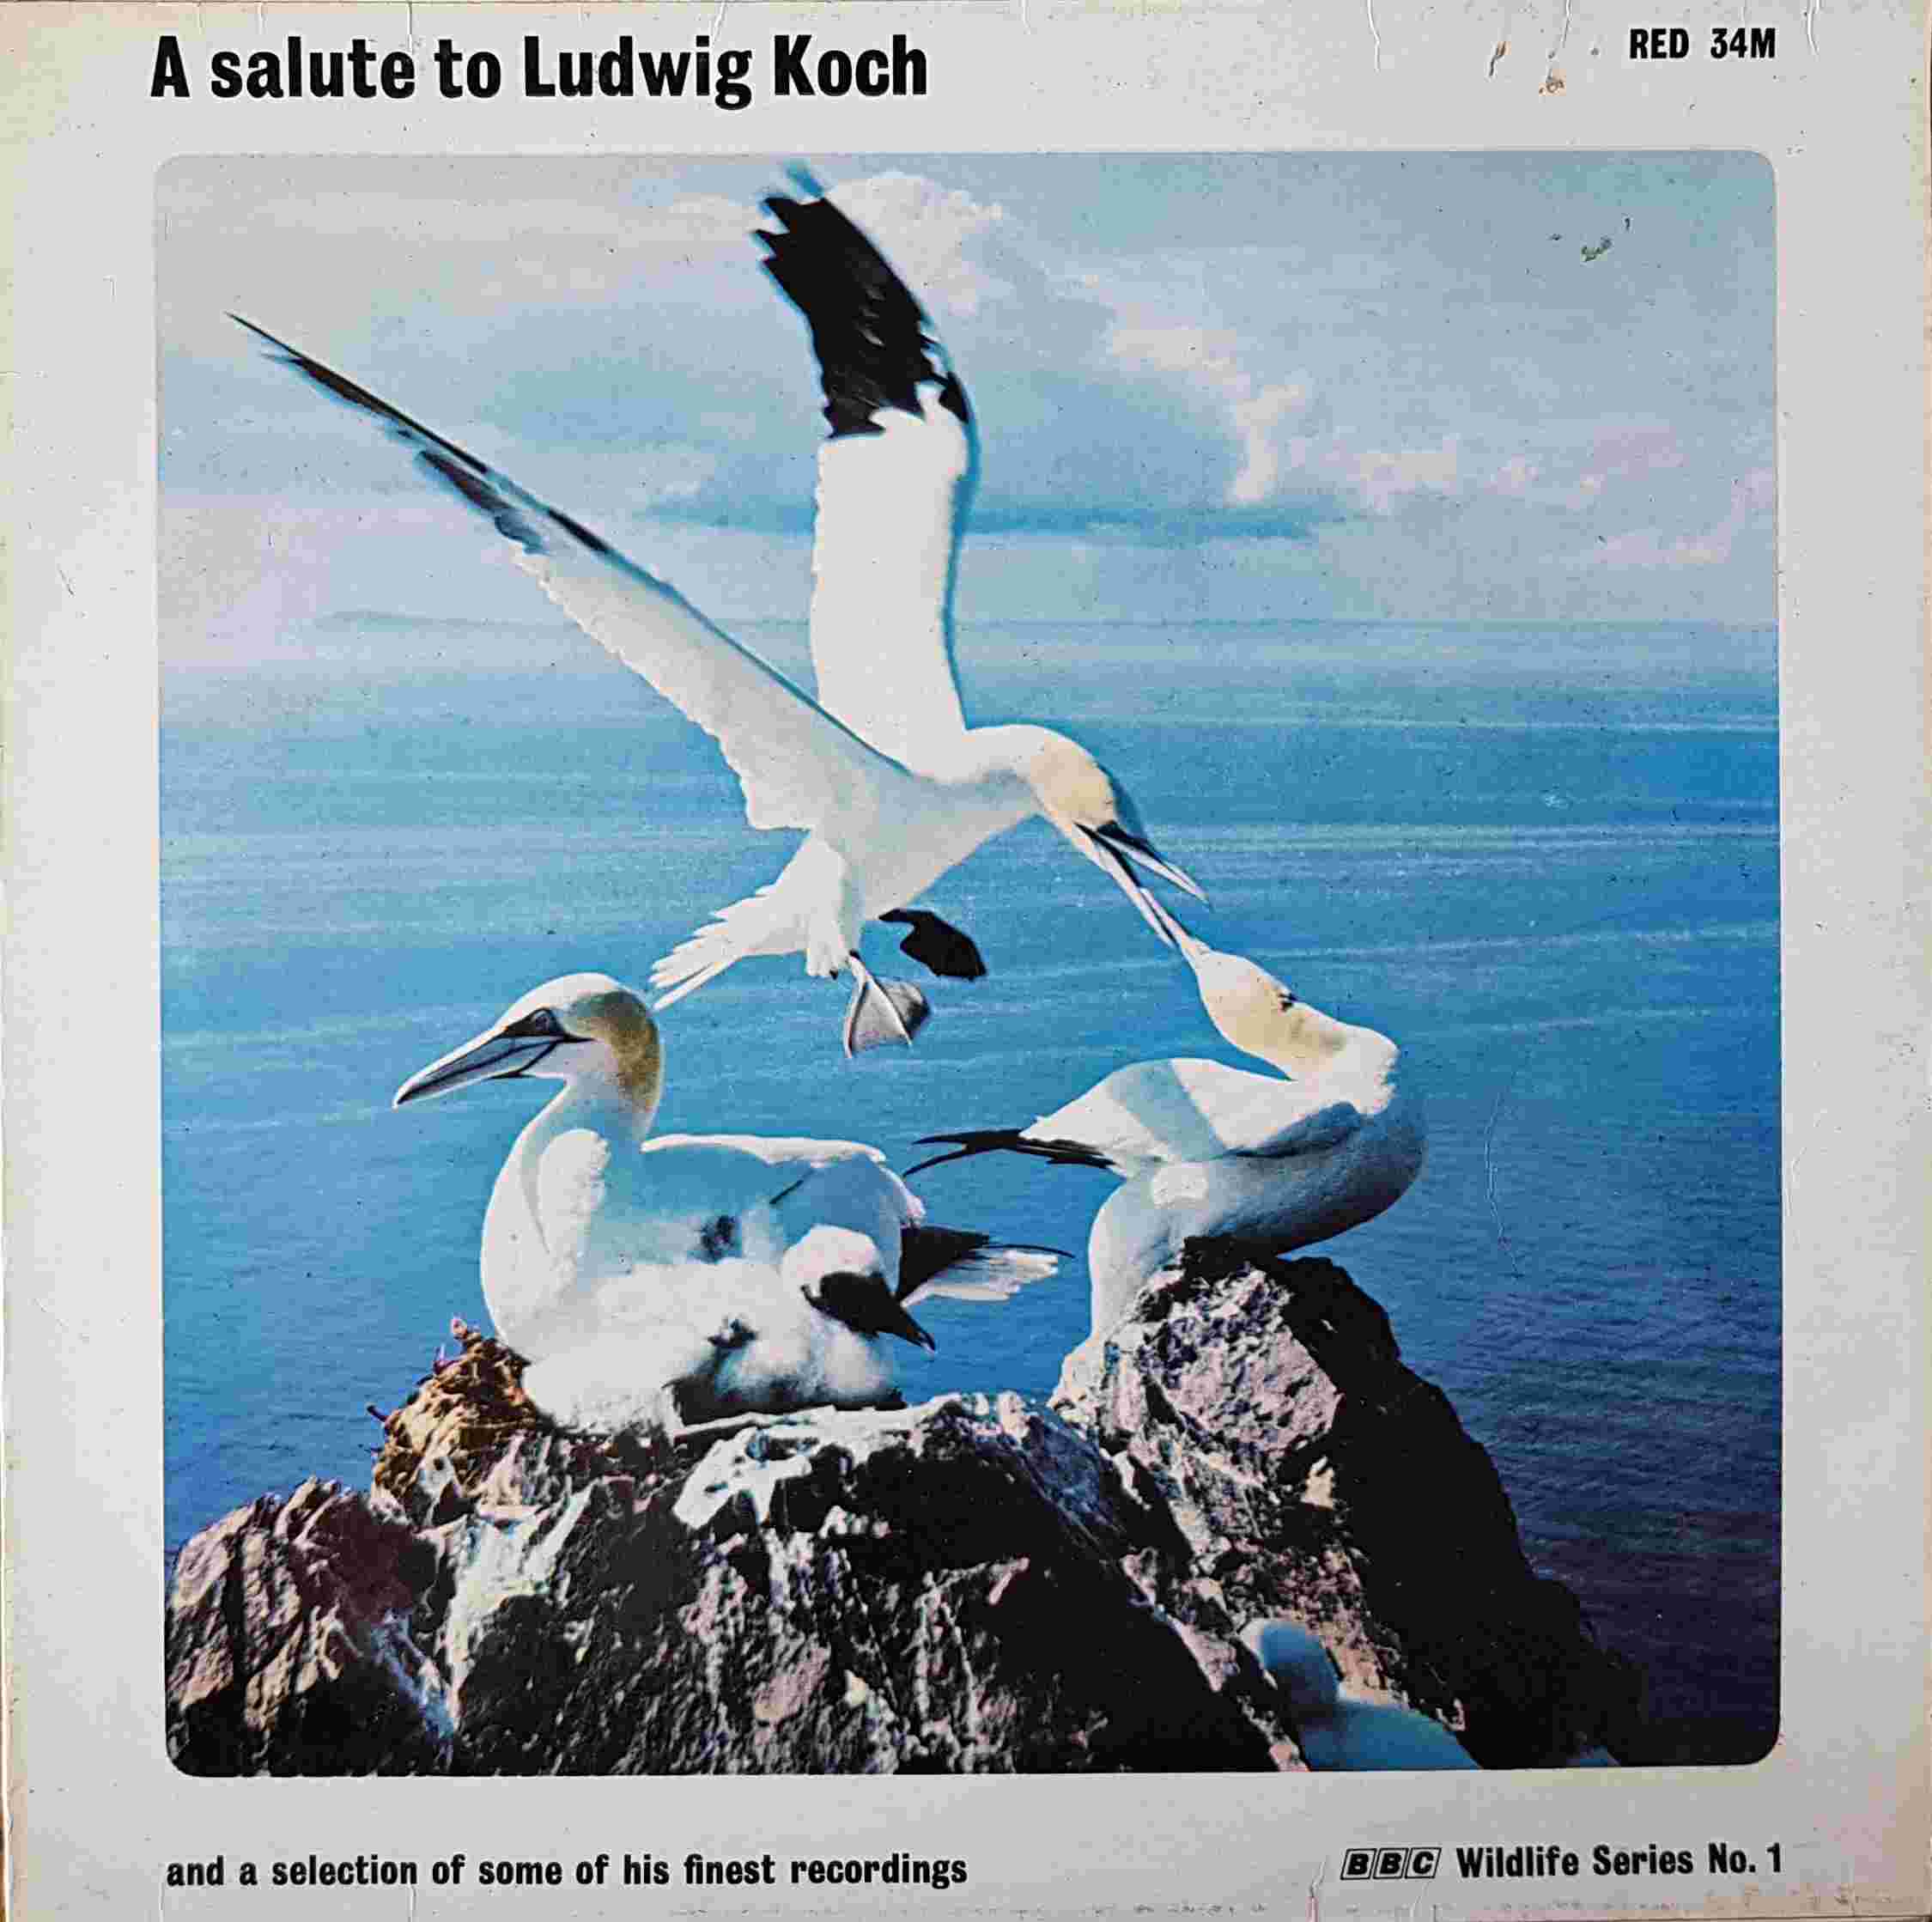 Picture of RED 34 A salute to Ludwig Koch - BBC wildlife series no. 1 by artist Ludwig Koch from the BBC albums - Records and Tapes library